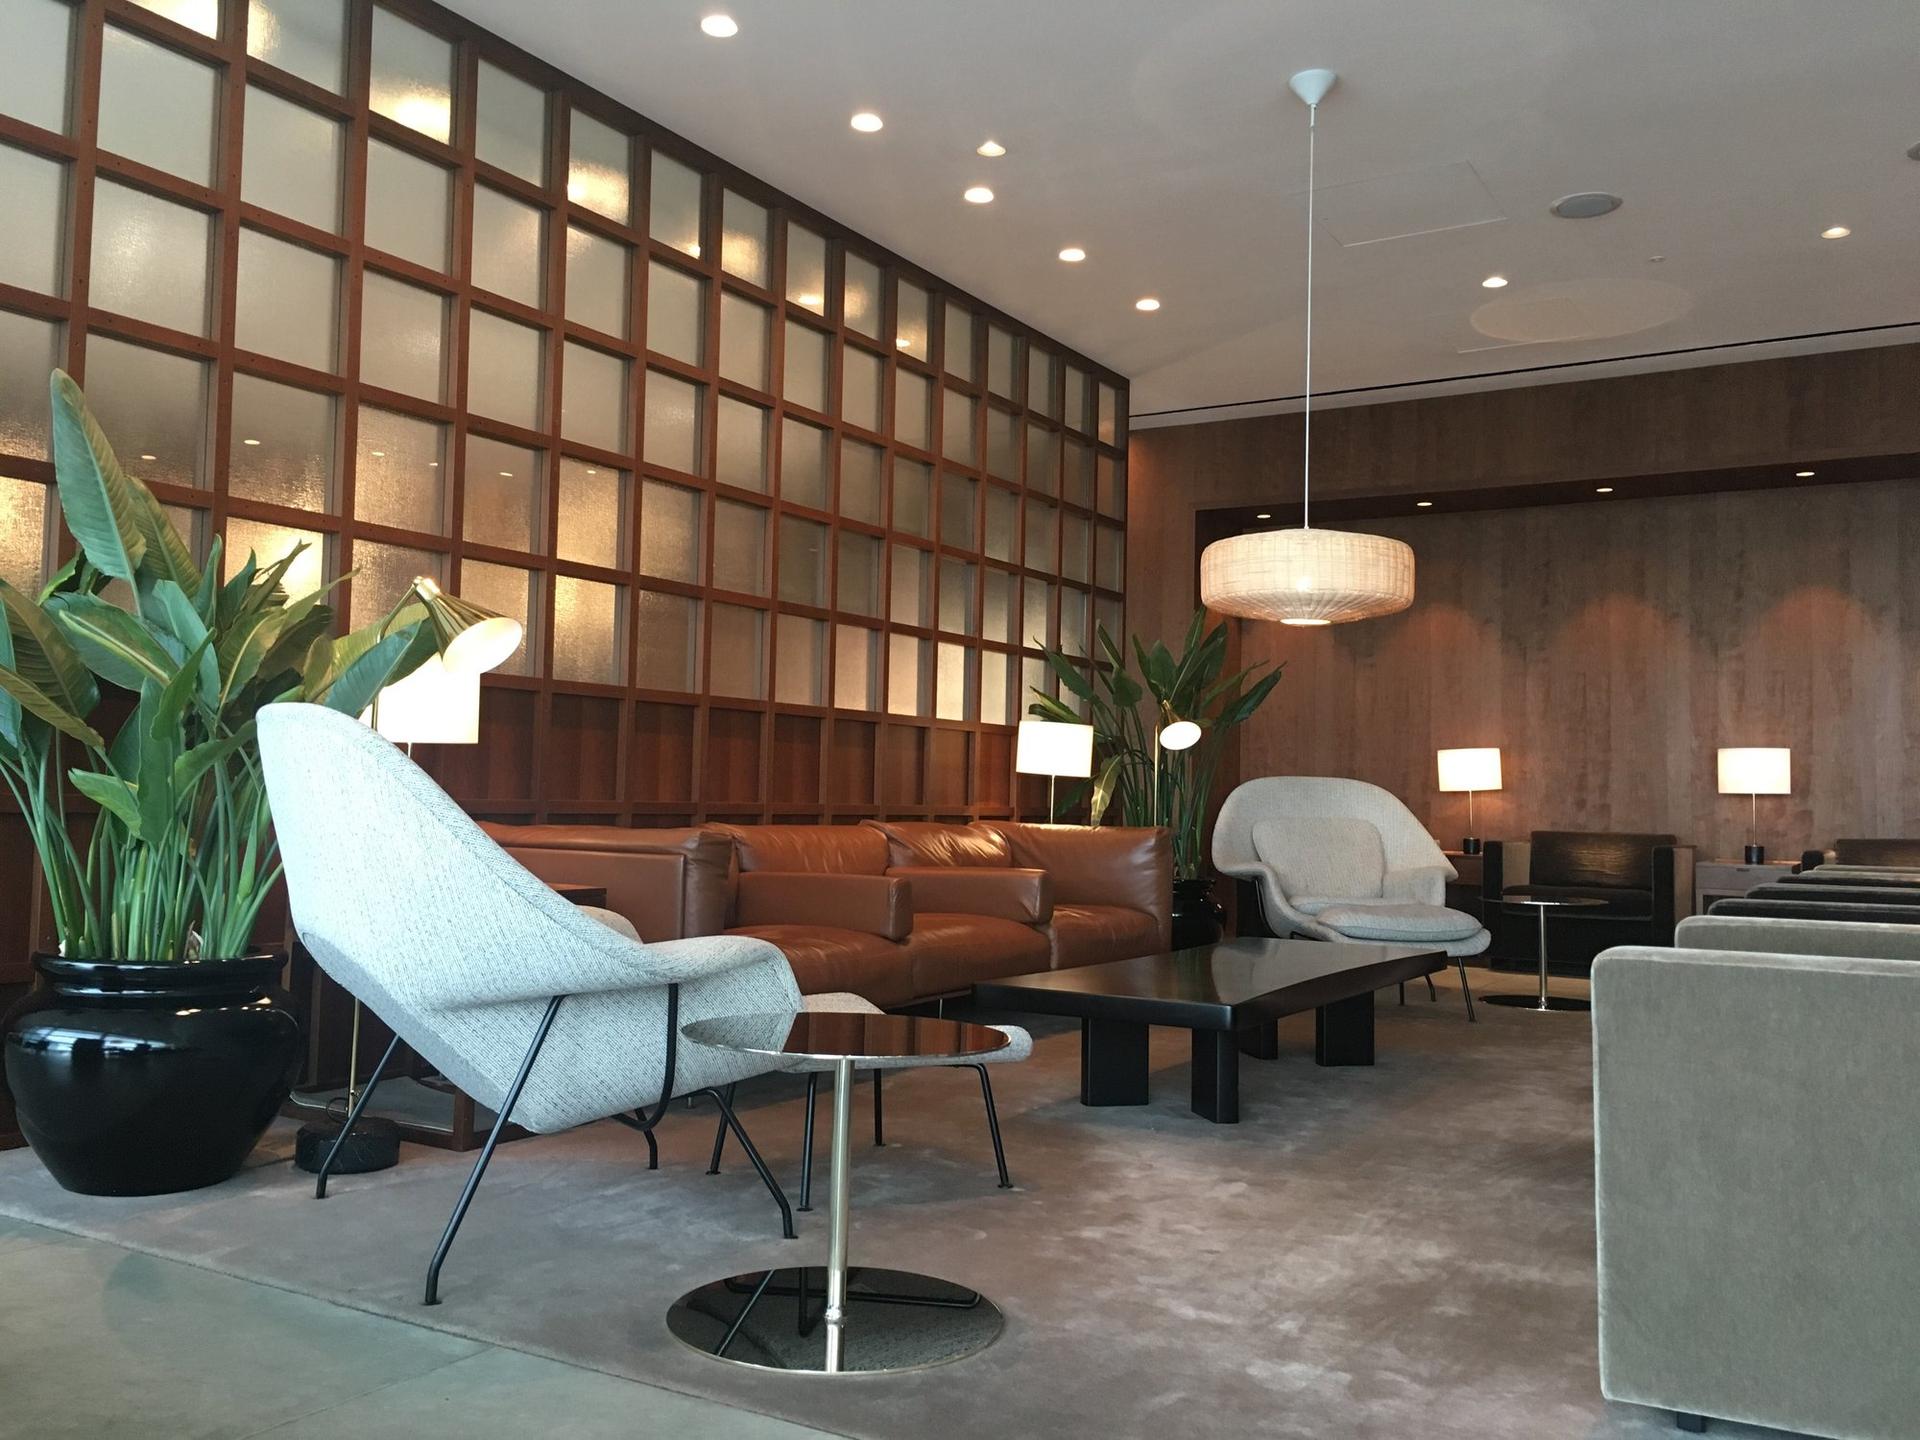 Cathay Pacific Business Class Lounge image 45 of 48